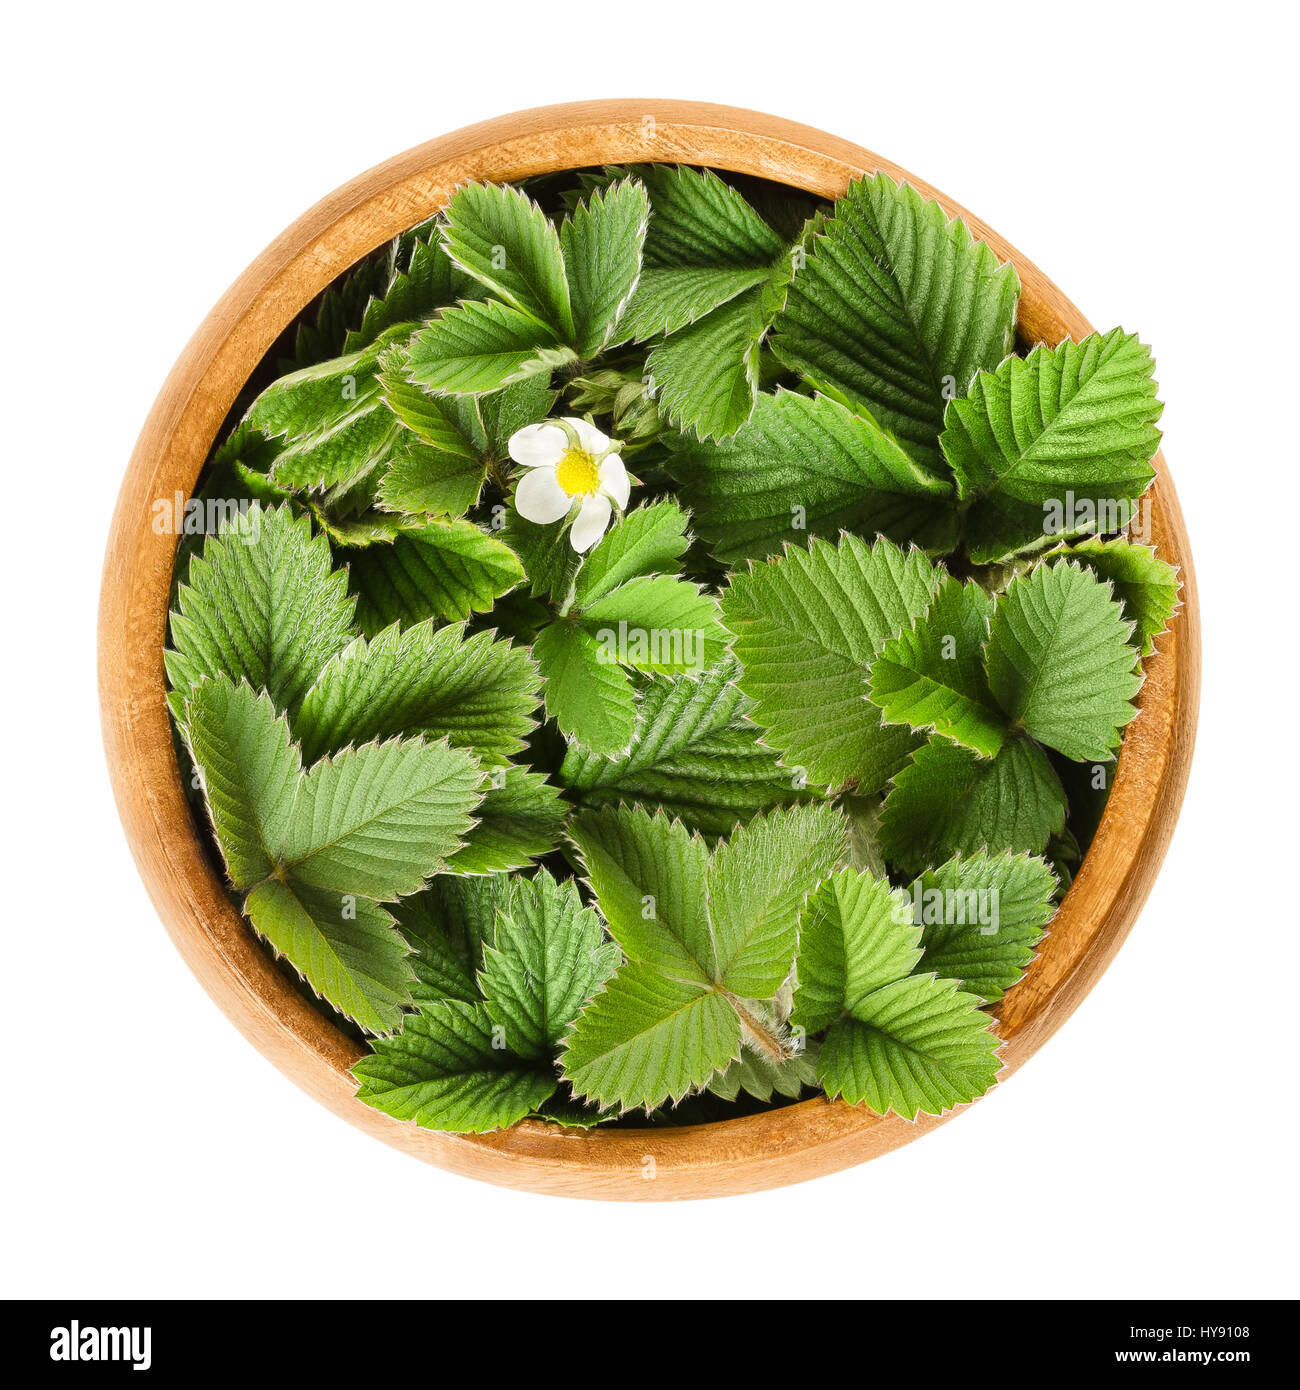 European wild strawberry leaves in wooden bowl with single white flower. Fragaria vesca. Fresh green edible leaves, used for teas and salads. Stock Photo